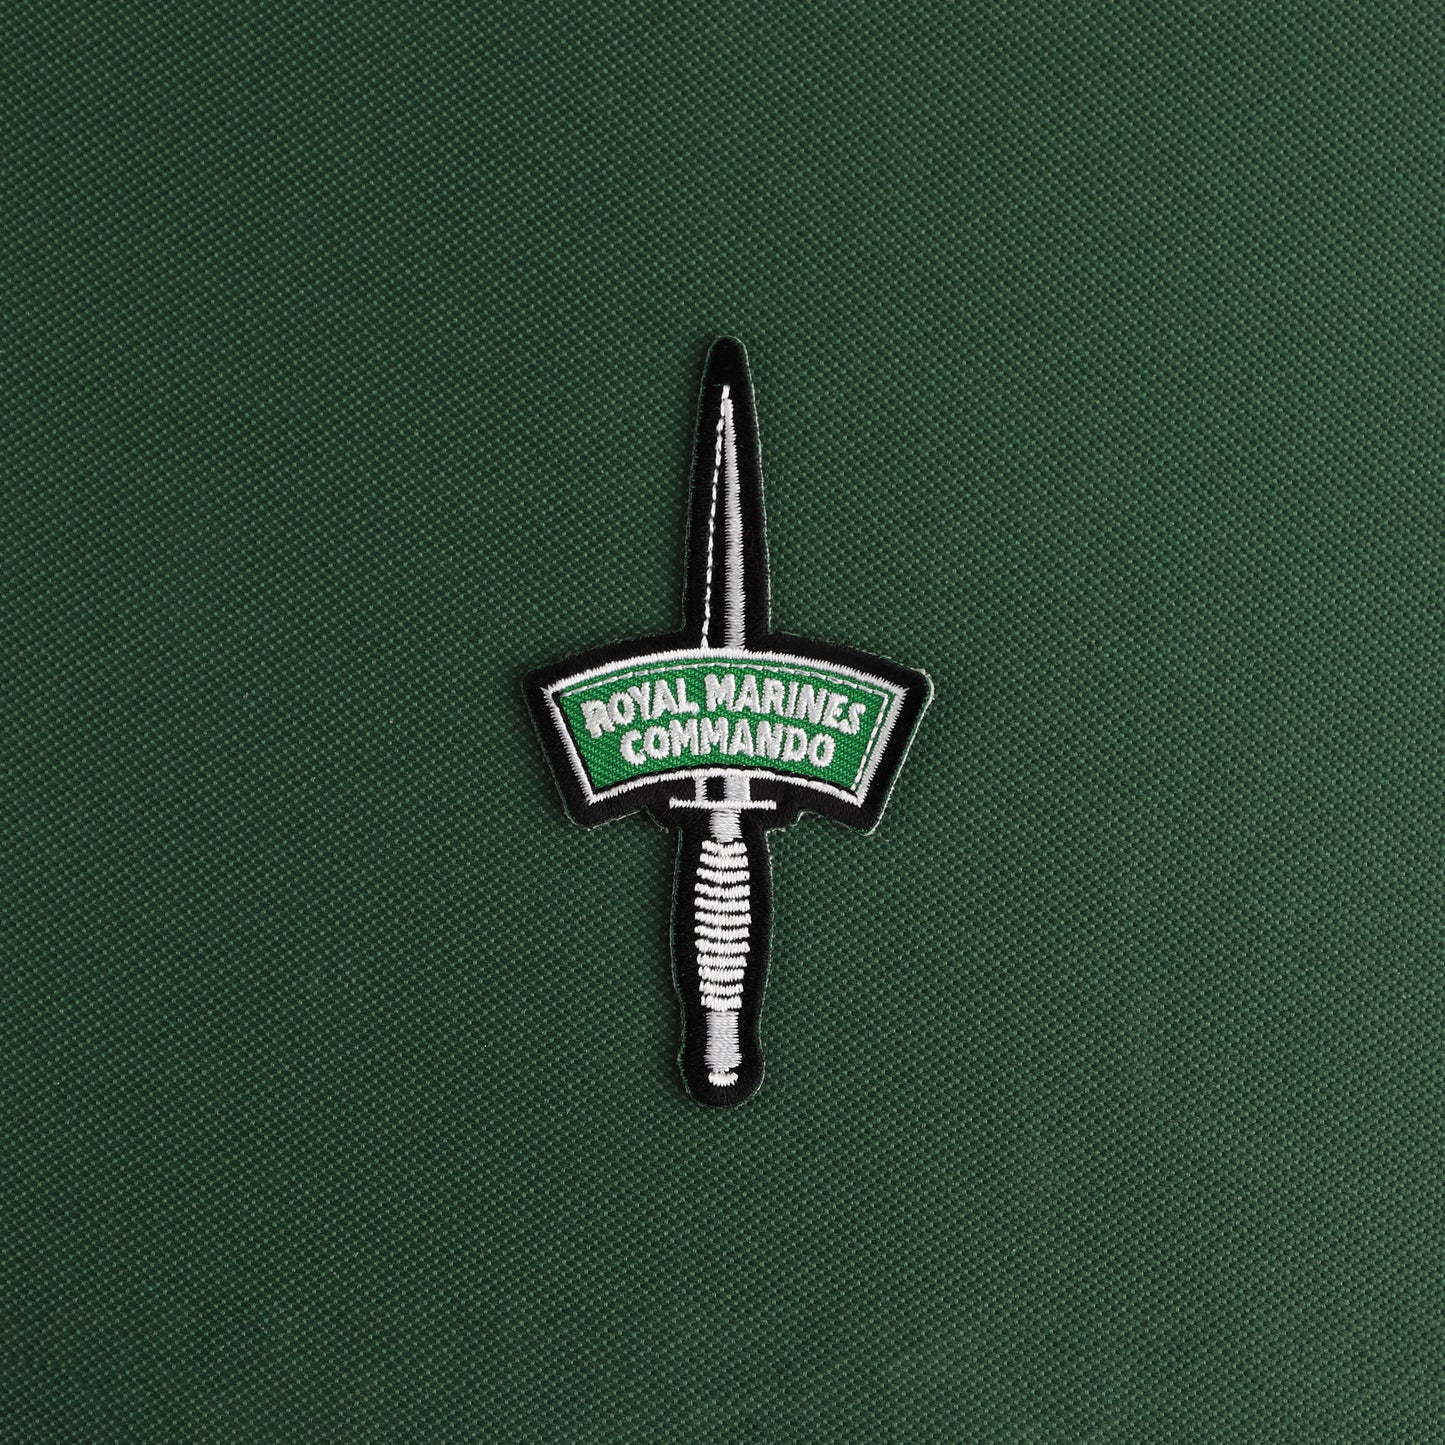 Royal Marines Commando Fairbairn Sykes Embroidered Patch